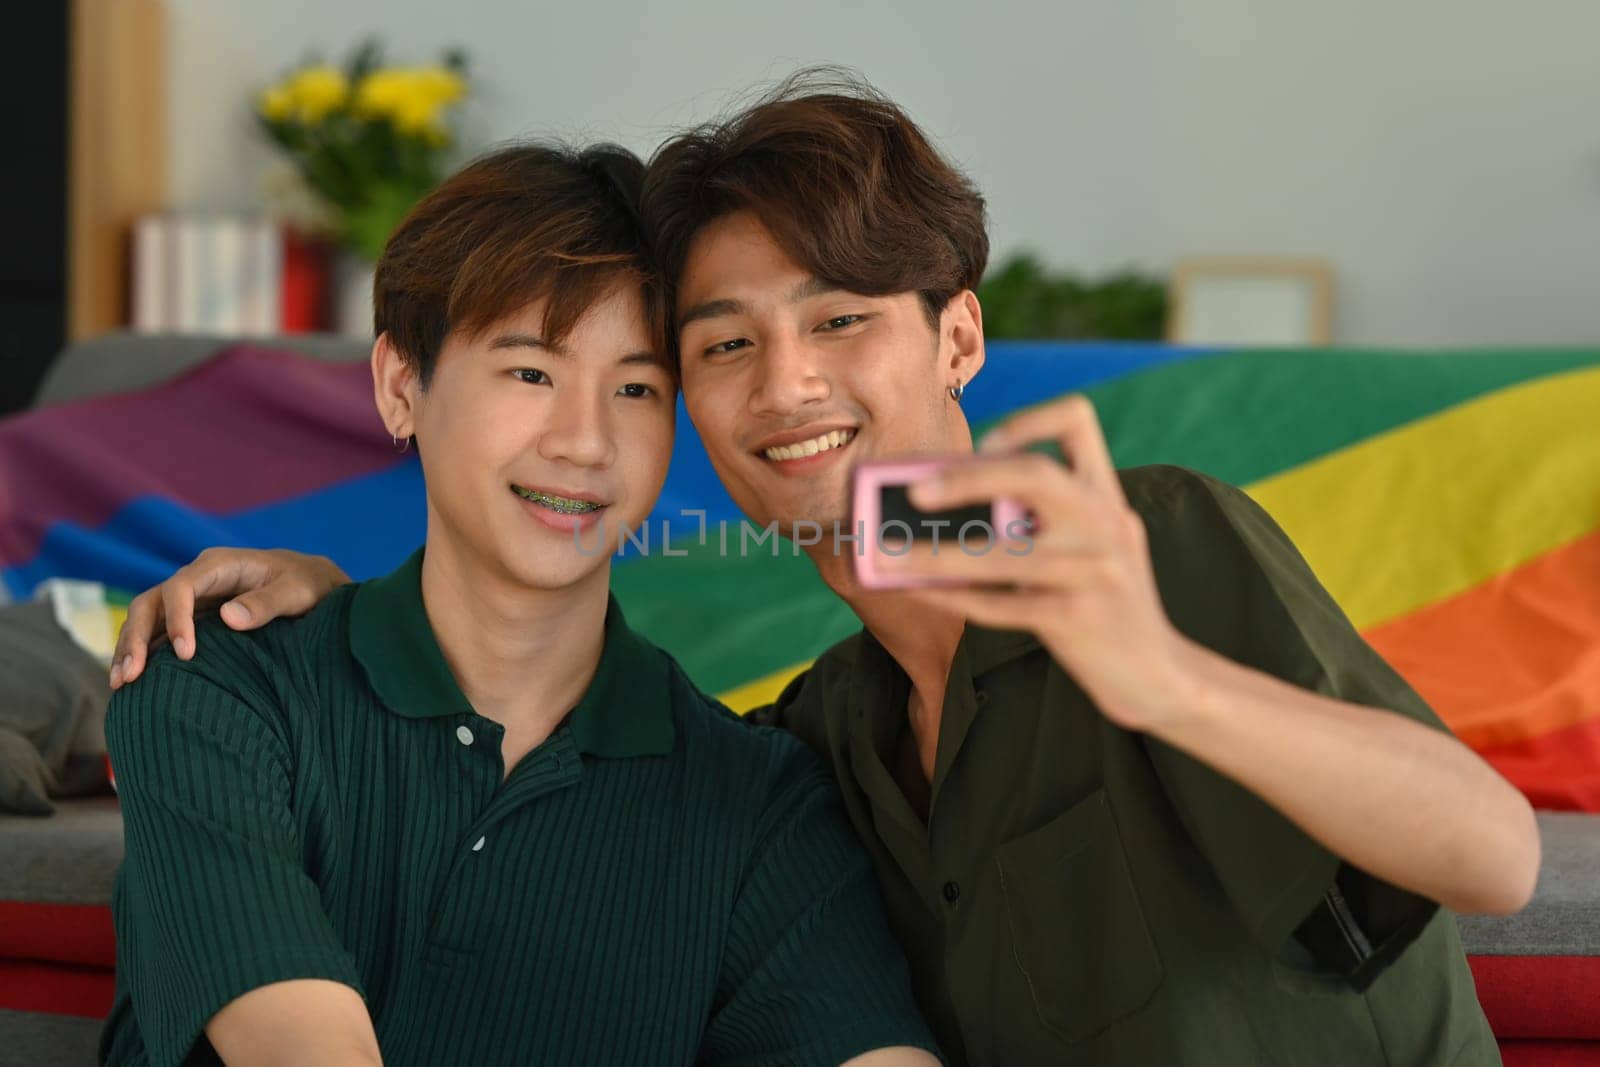 Joyful gay couple taking a selfie with compact camera in living room rainbow flag in background. LGBT, love and human rights concept.